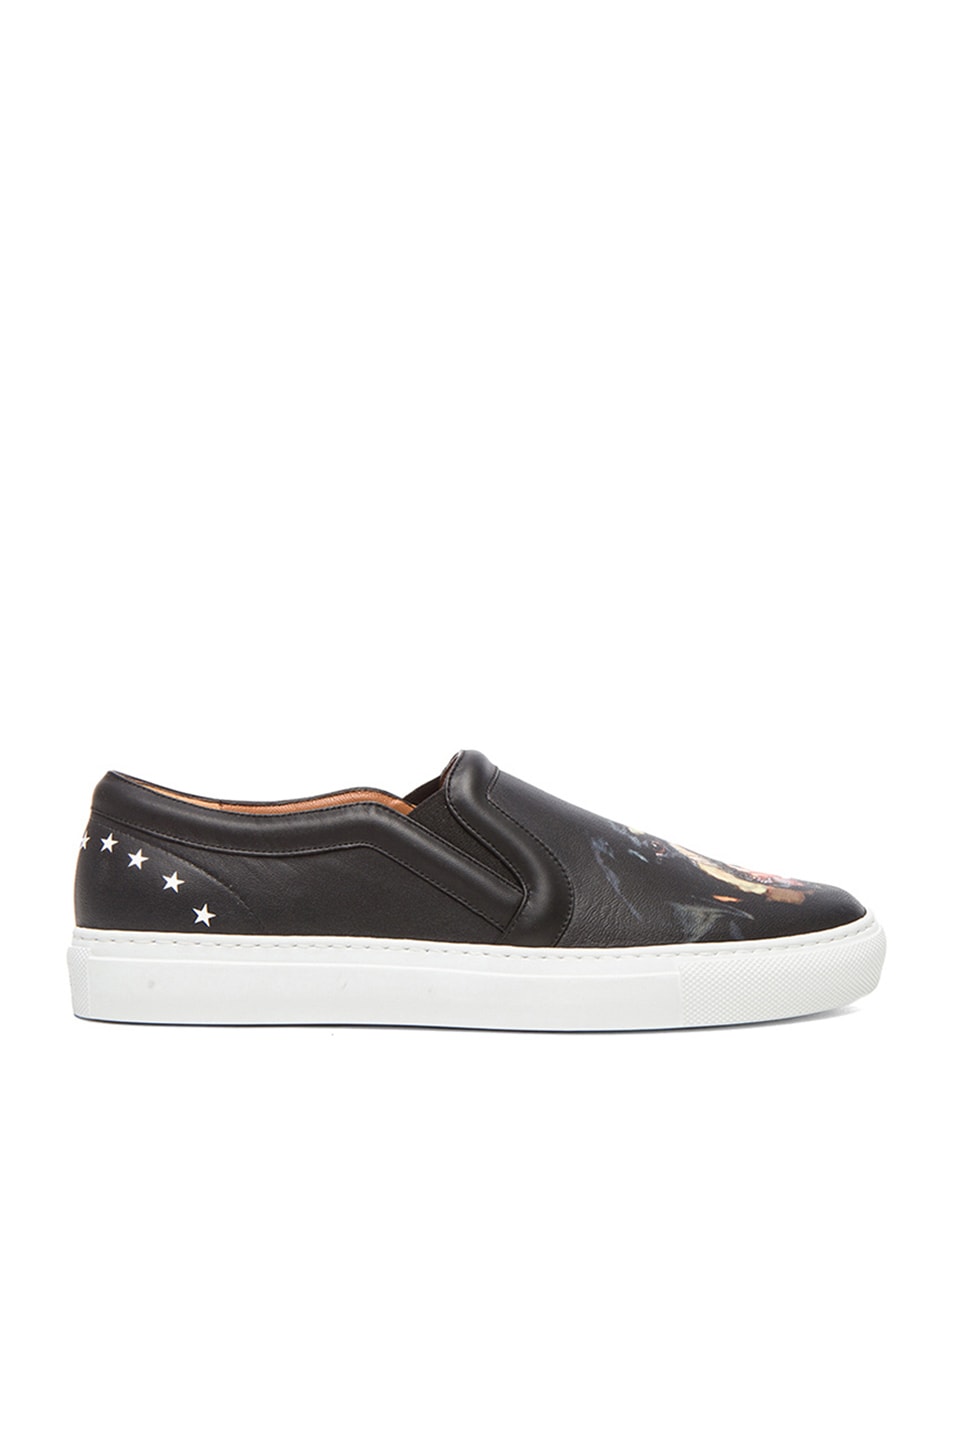 Givenchy Rottweiler Skate Leather Sneakers in Multi | FWRD